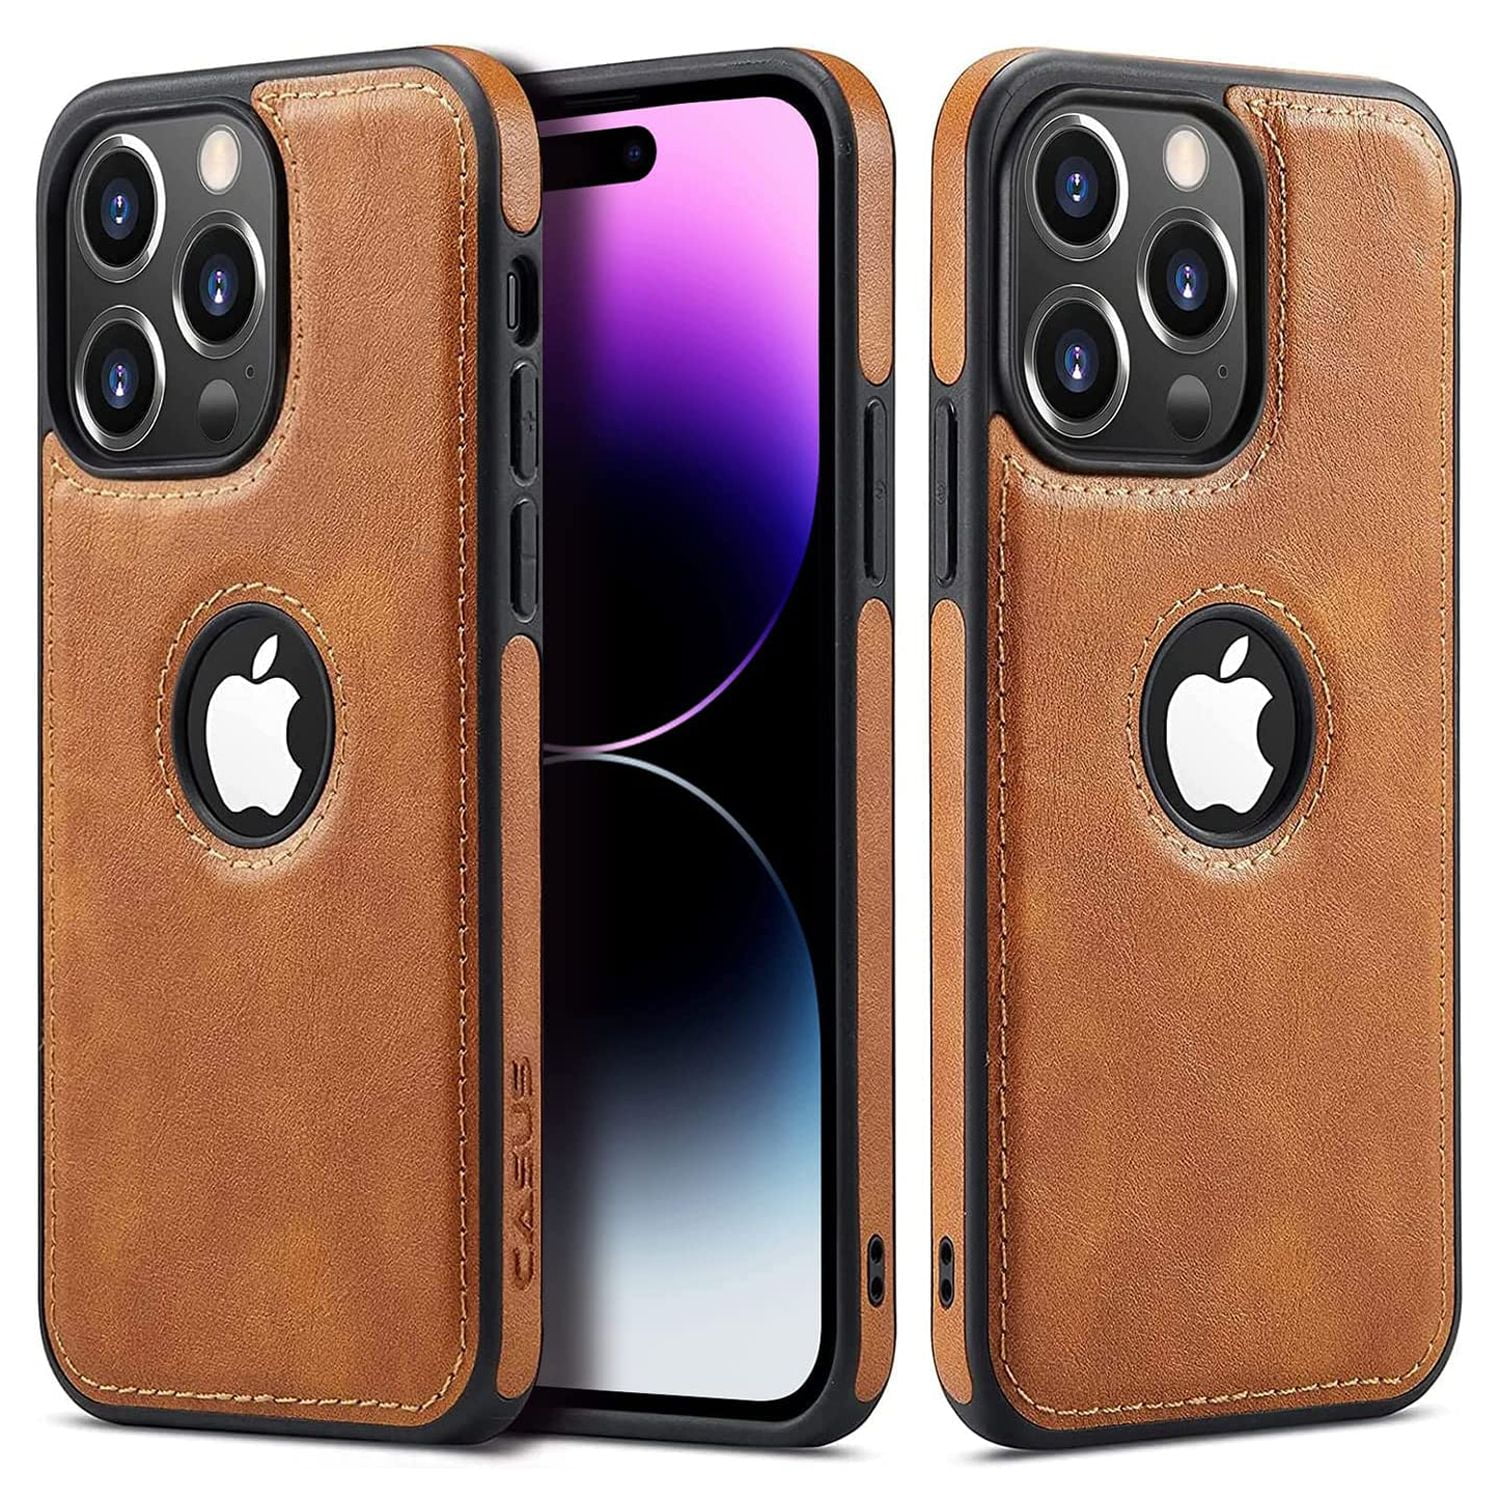 Luxury Designer Leather Classic Mobile Cell Phone Case iPhone 11